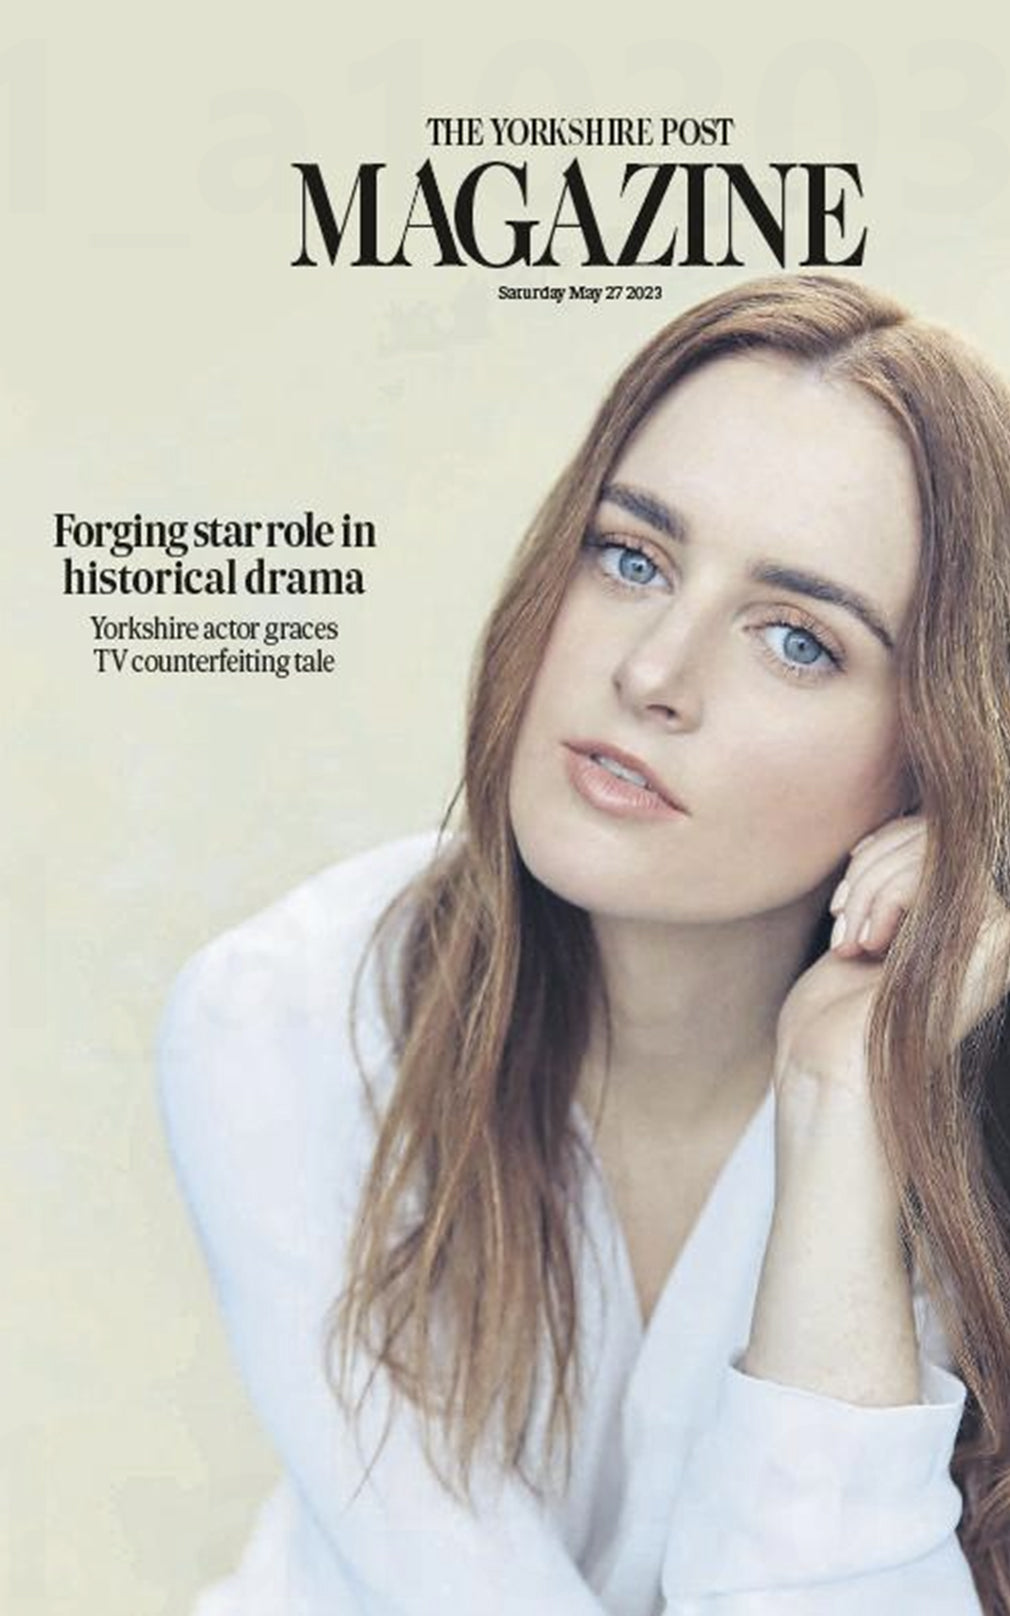 From cover of the Yorkshire Post Magazine.